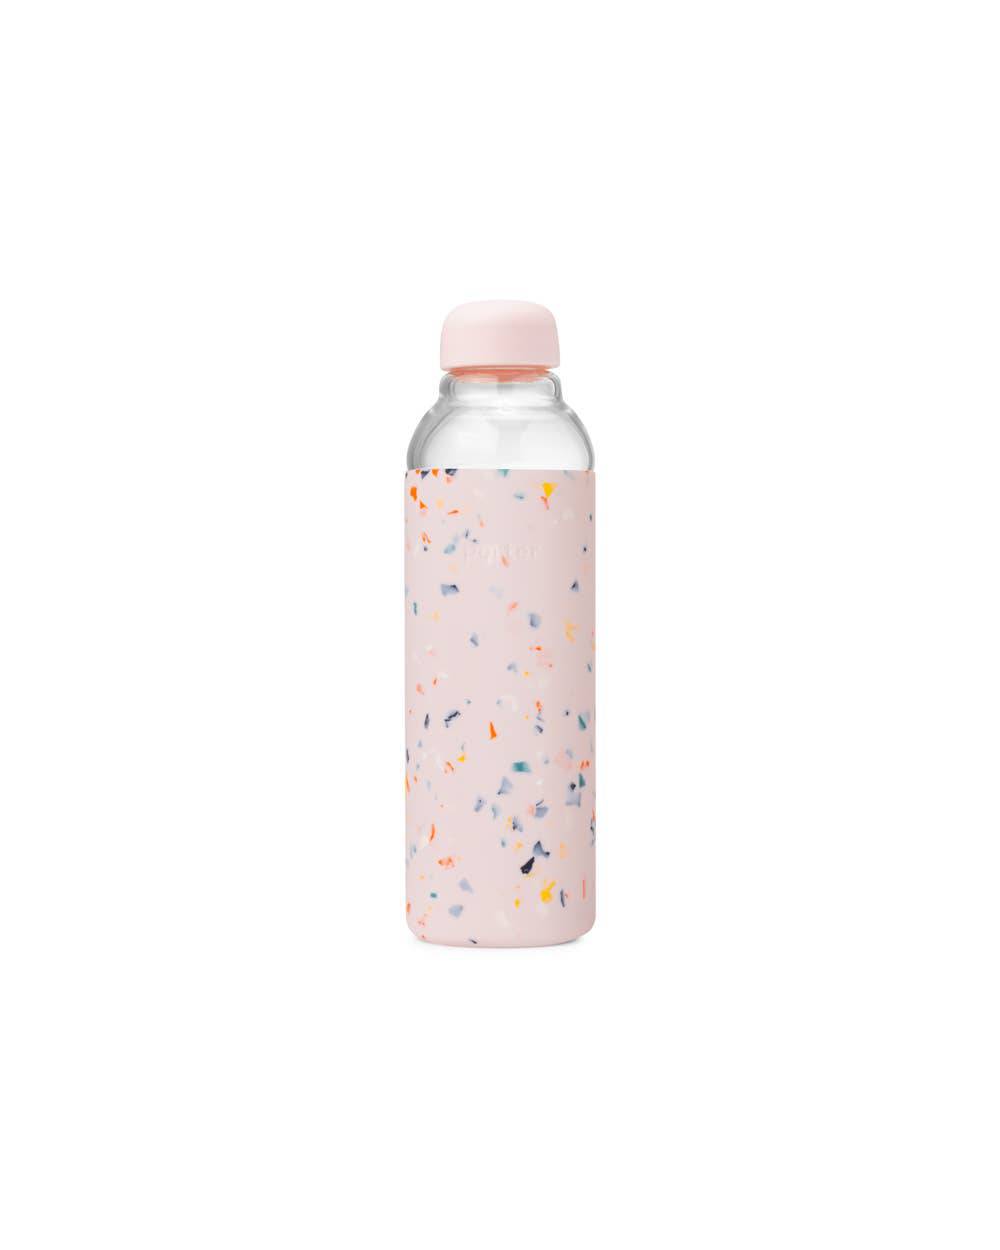 Reusable Glass + Silicone Water Bottle - Free Living Co